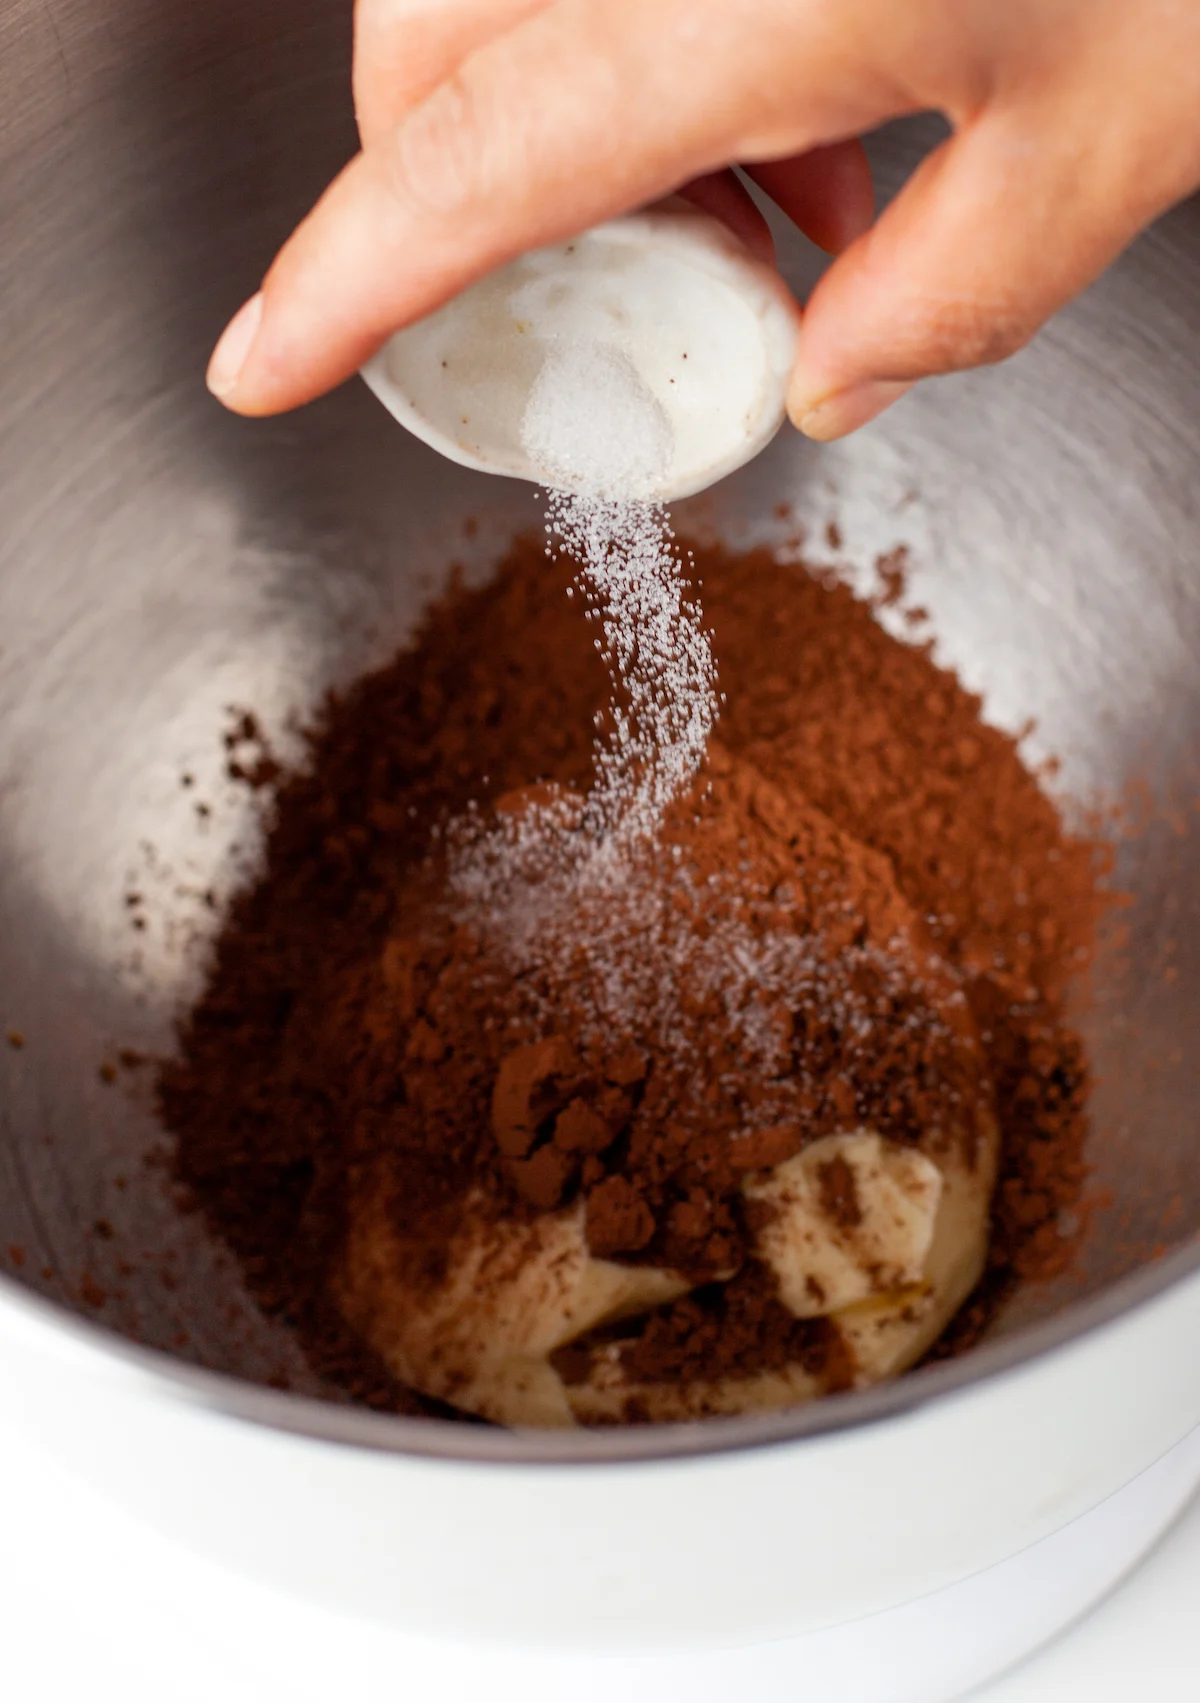 Salt being poured into a metal mixing bowl with cocoa powder and butter